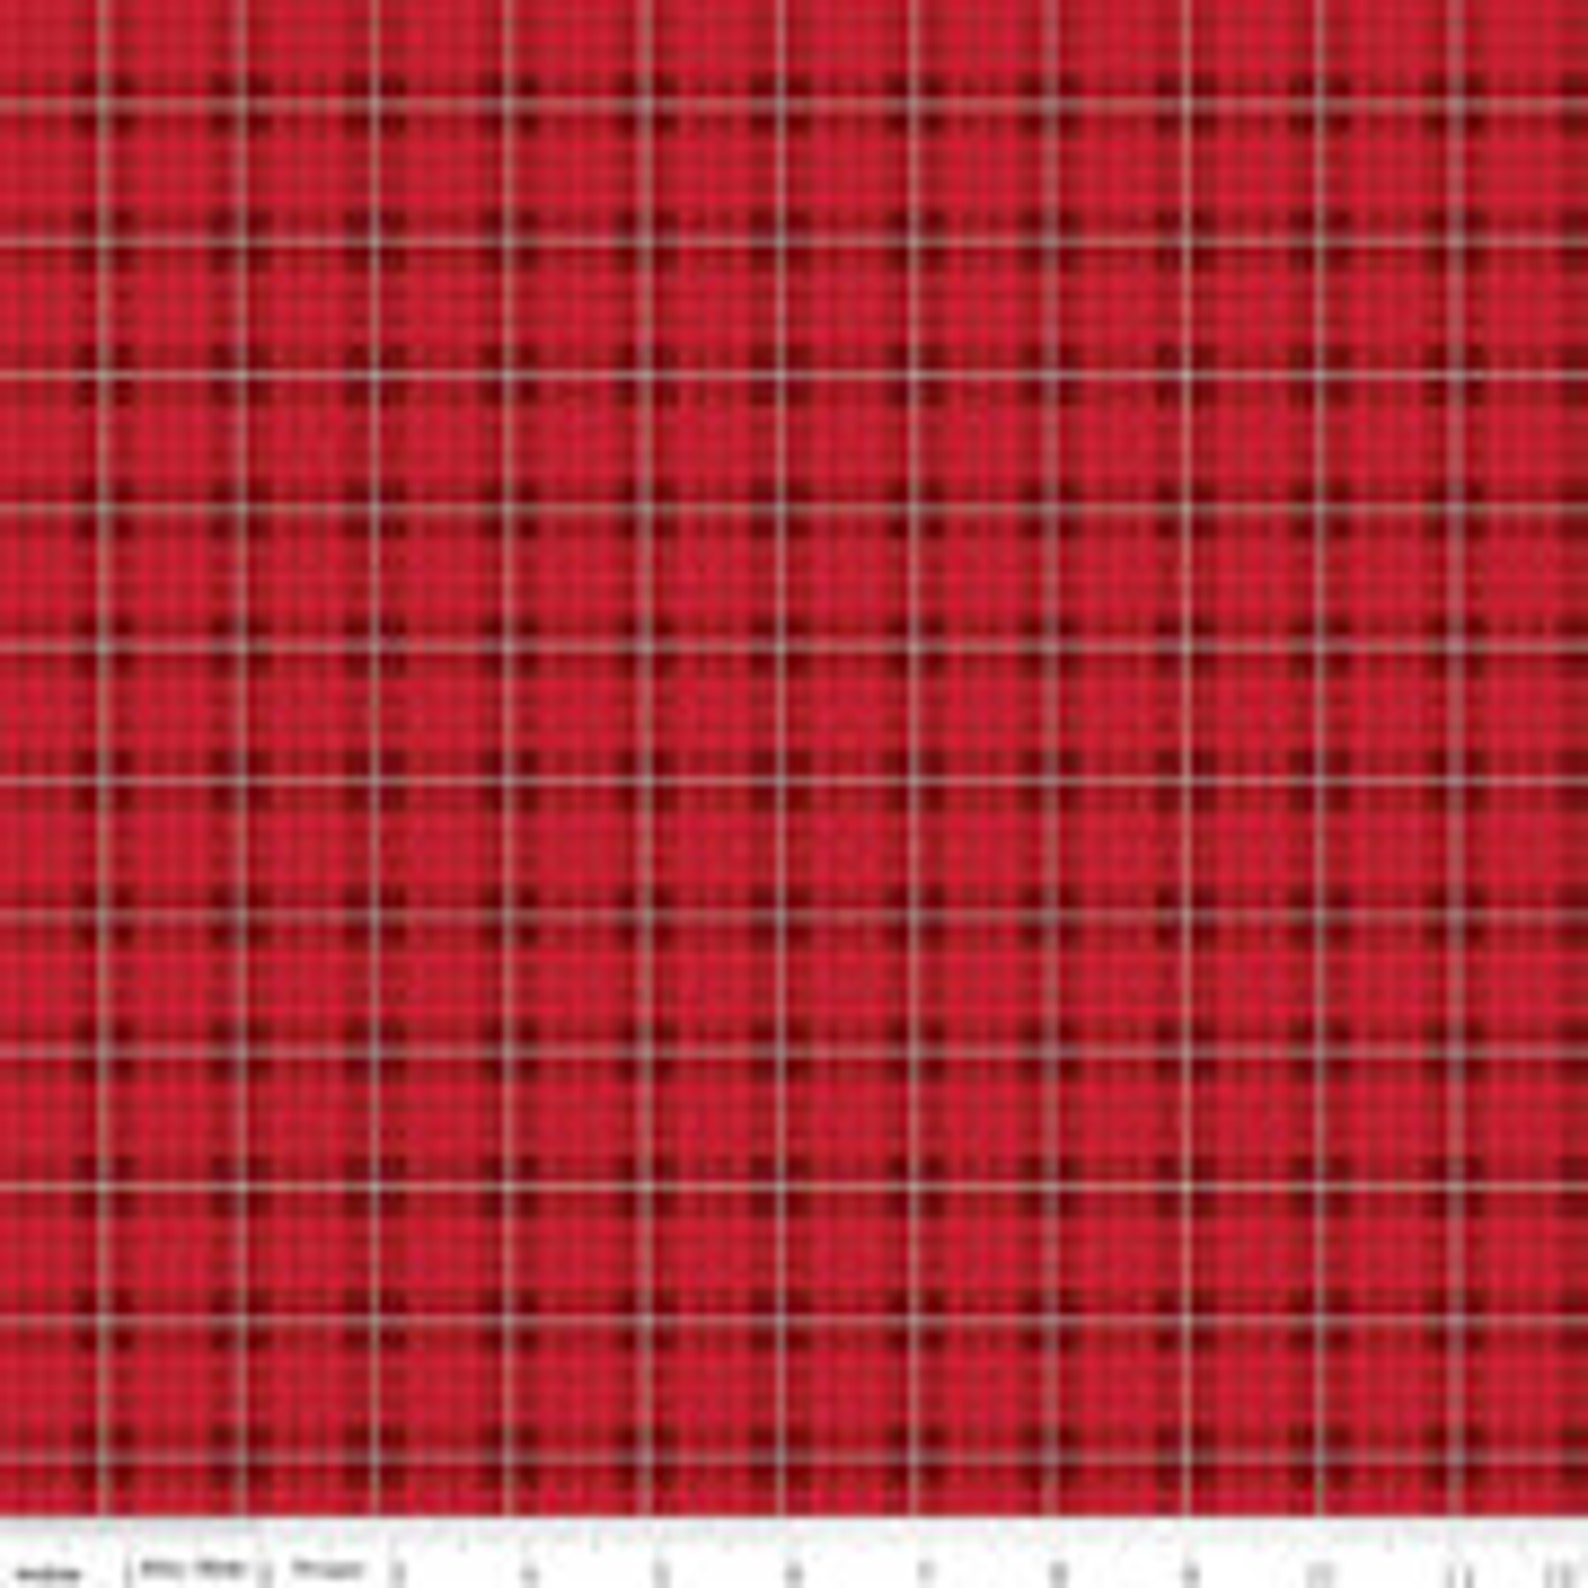 Wild at Heart Red and Black Plaid Half Yard | Etsy